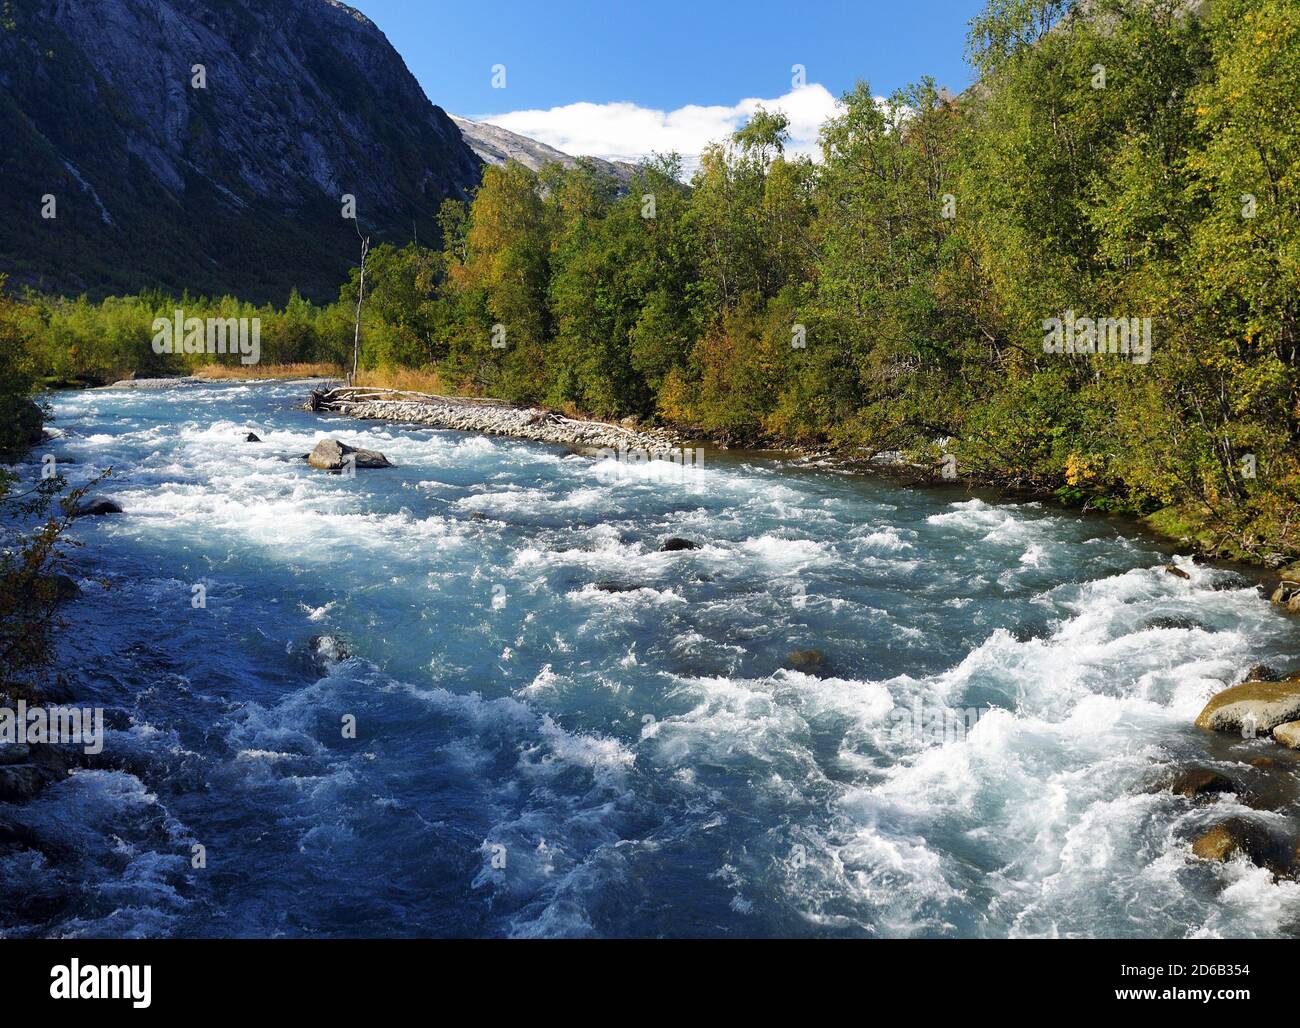 Beautiful Wild River Jostedola In Jostedalsbreen National Park On A Sunny Summer Day With A Clear Blue Sky And A Few Clouds Stock Photo